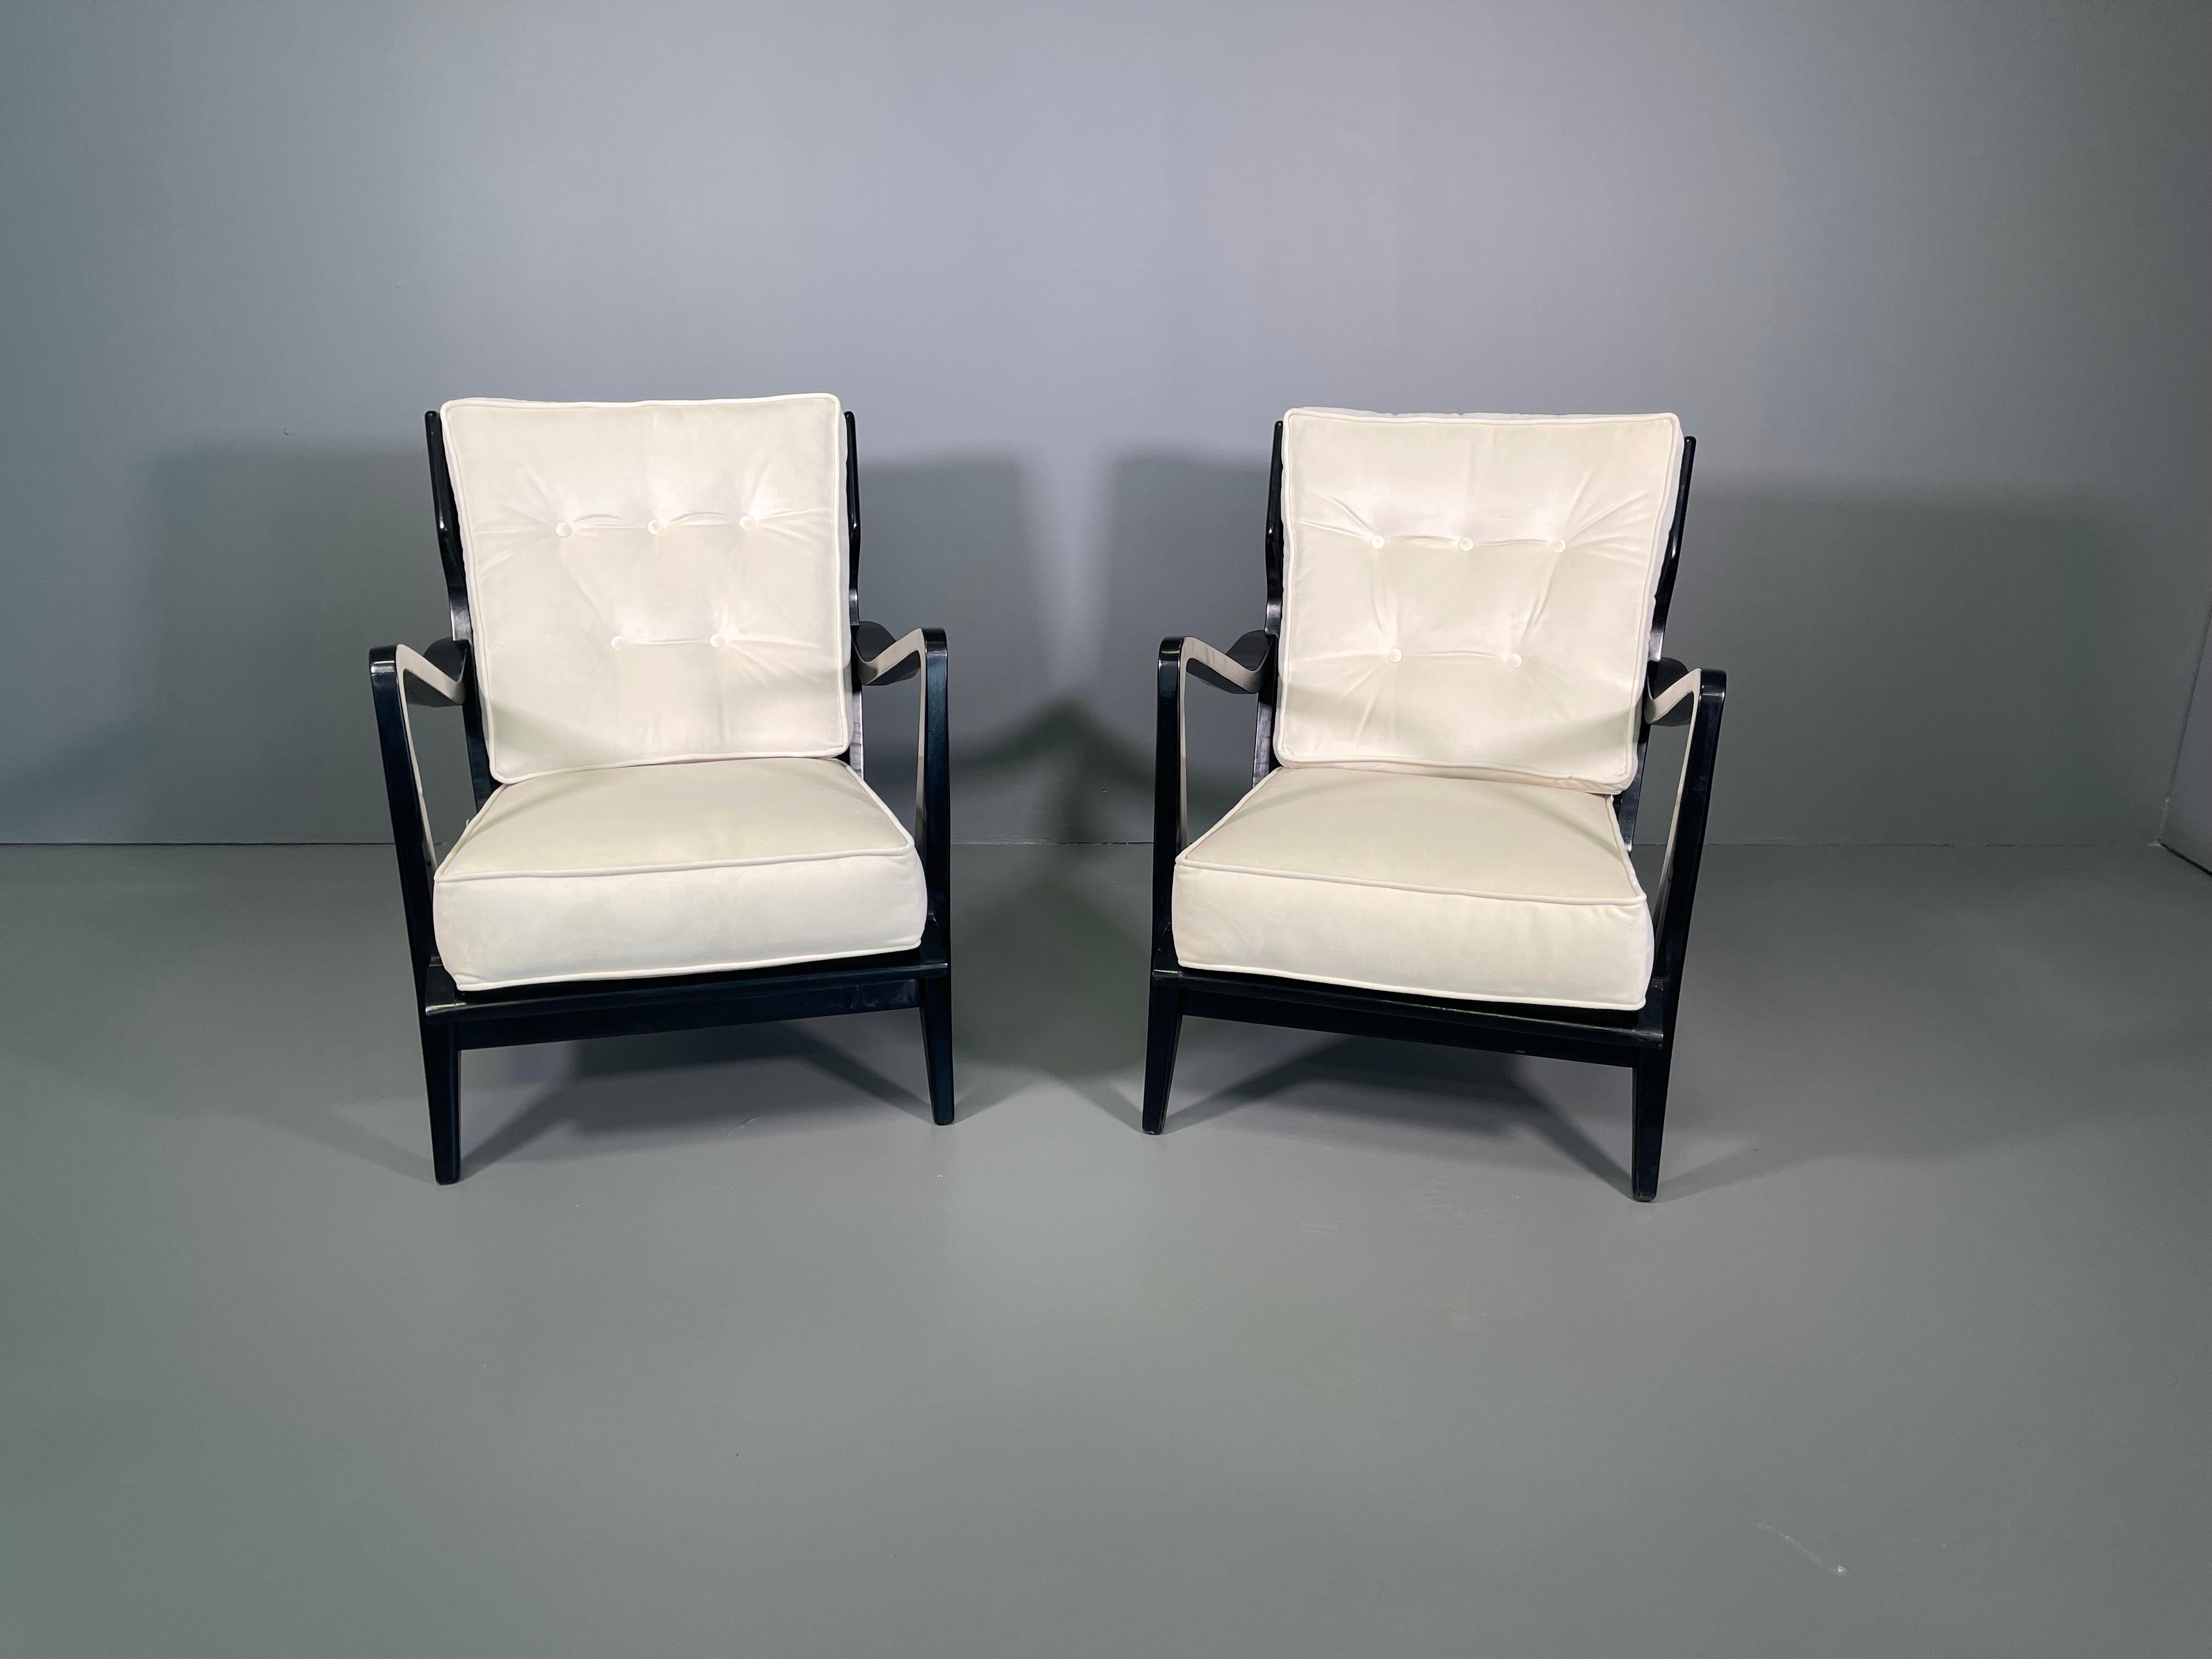 A pair of armchairs, model 516, designed by Gio Ponti and edited by Cassina in the 1950s. Walnut wood ebanized and fabric. Upwards rising arms and vertical open slats on the back. Each chair has at the reverse a label stating :